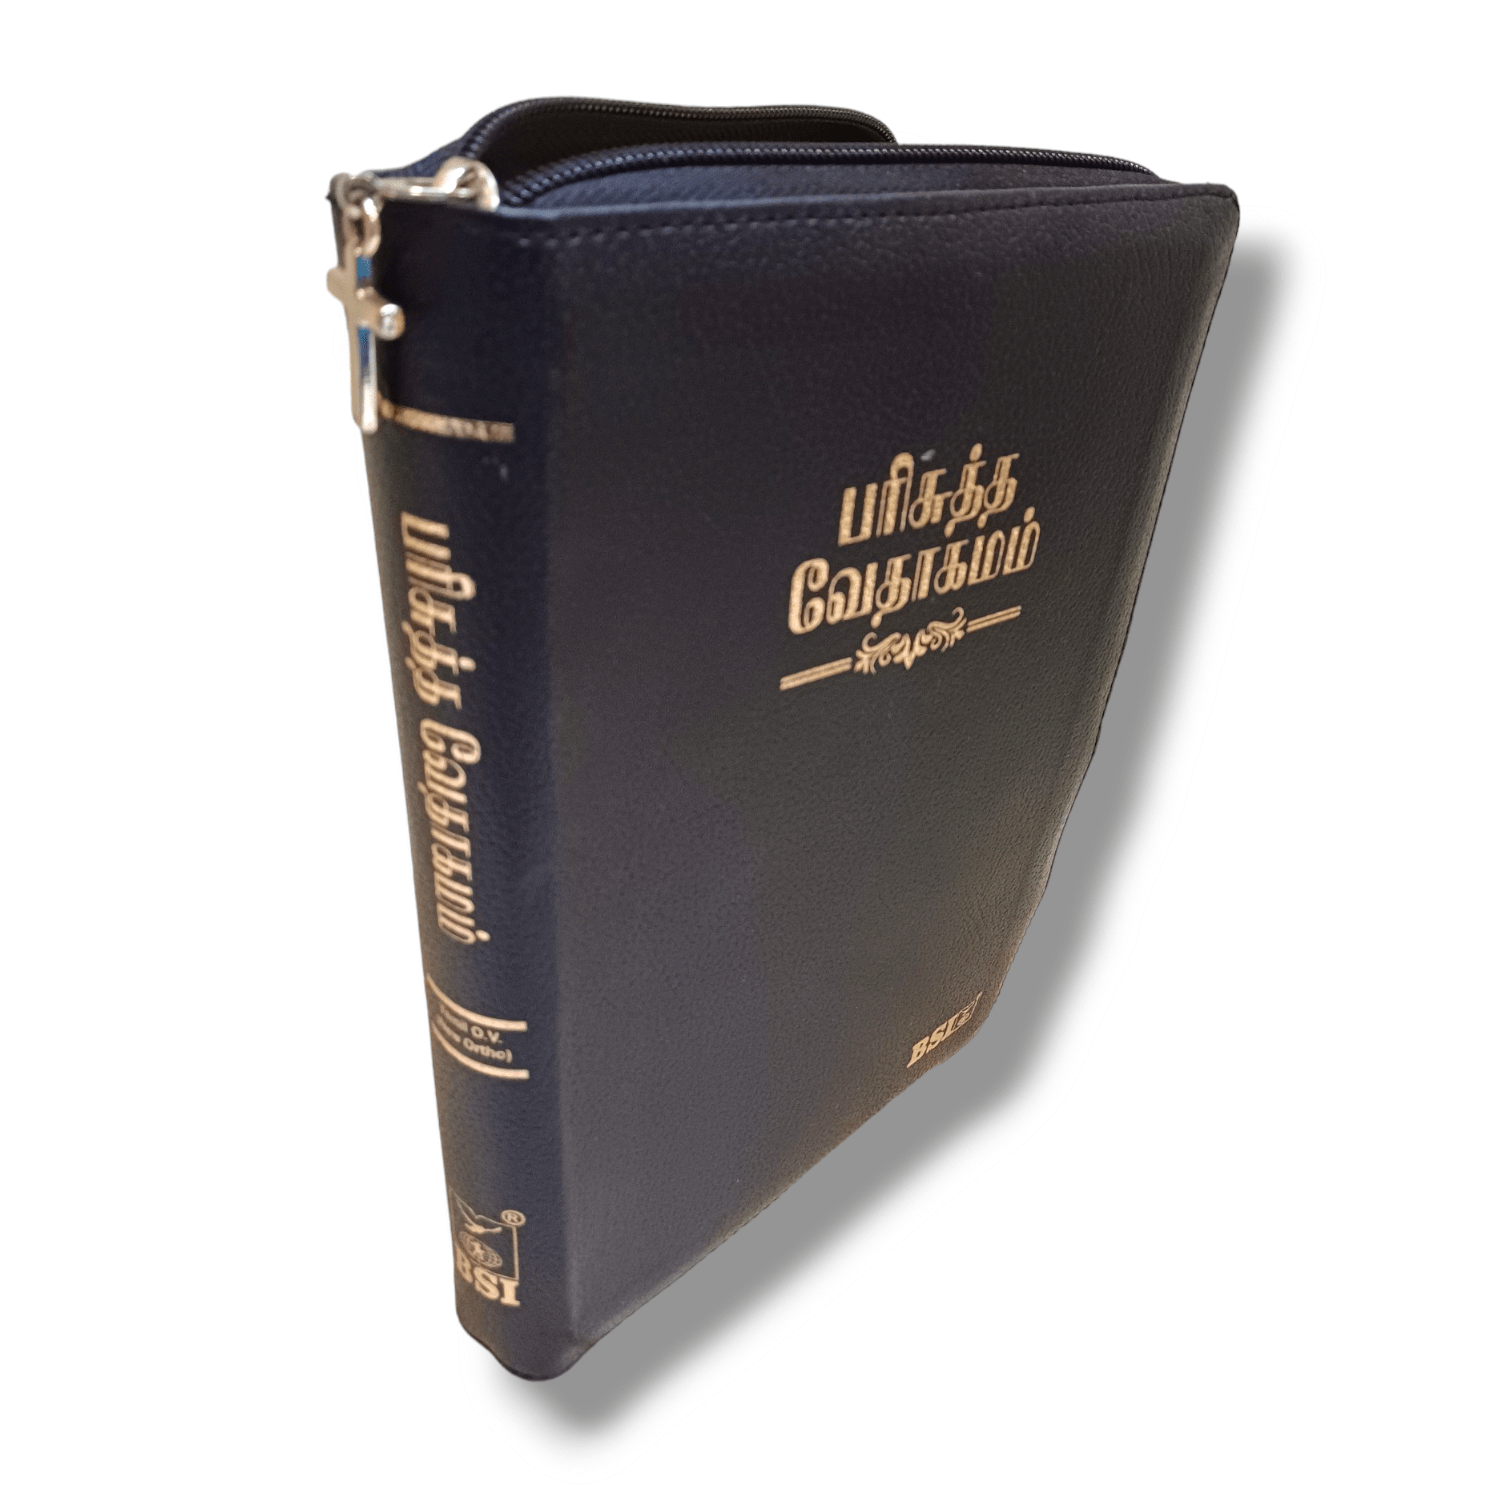 The Holy Bible In Tamil |Black Color Bound |With Index and Cross Zip Bible